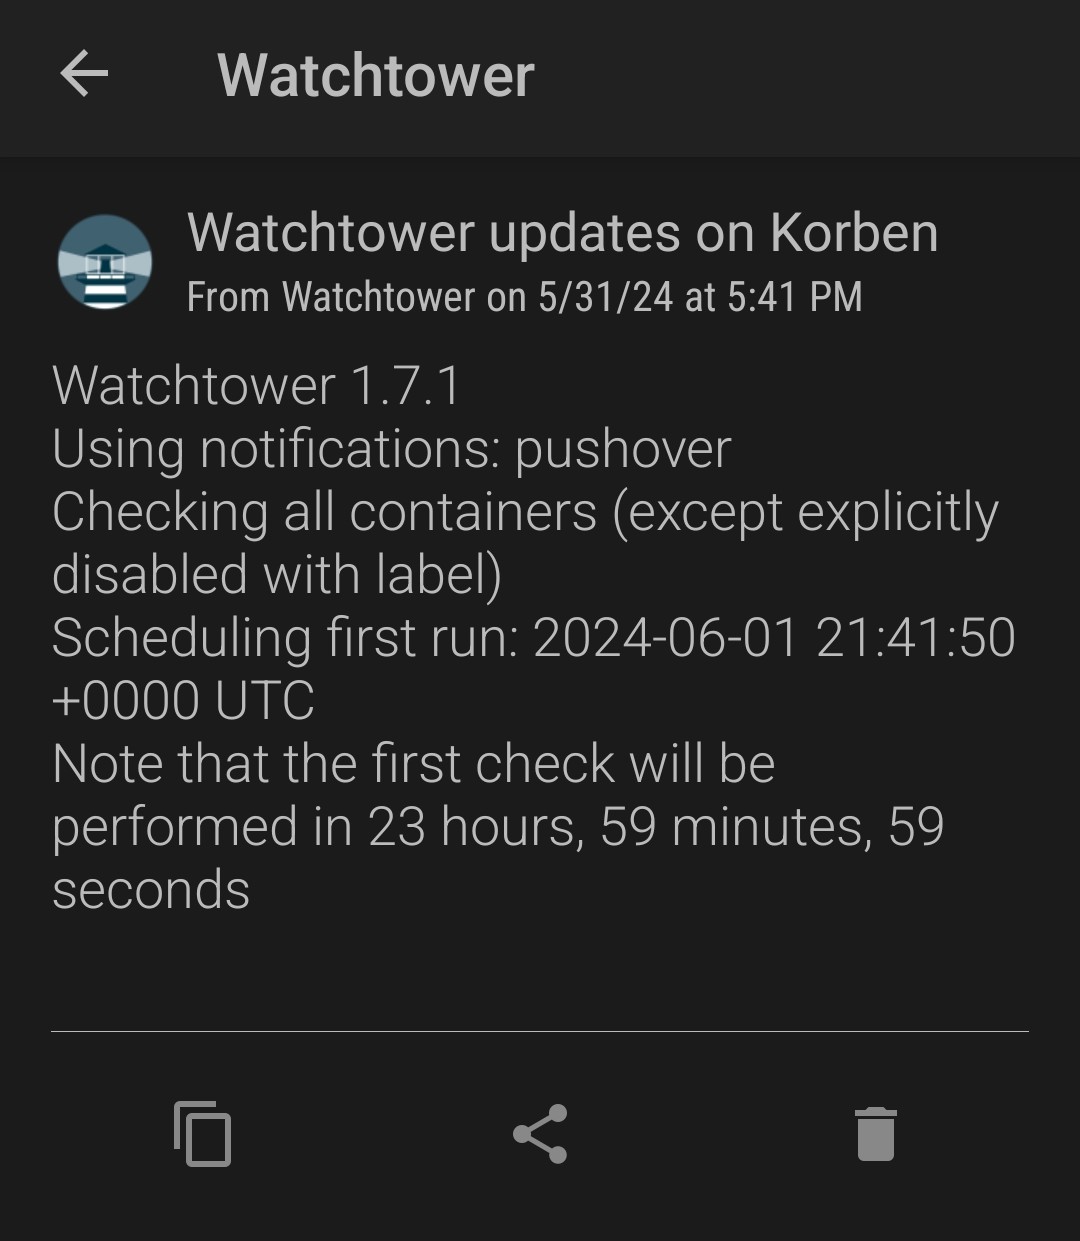 Initial Watchtower notification confirming Pushover is working.